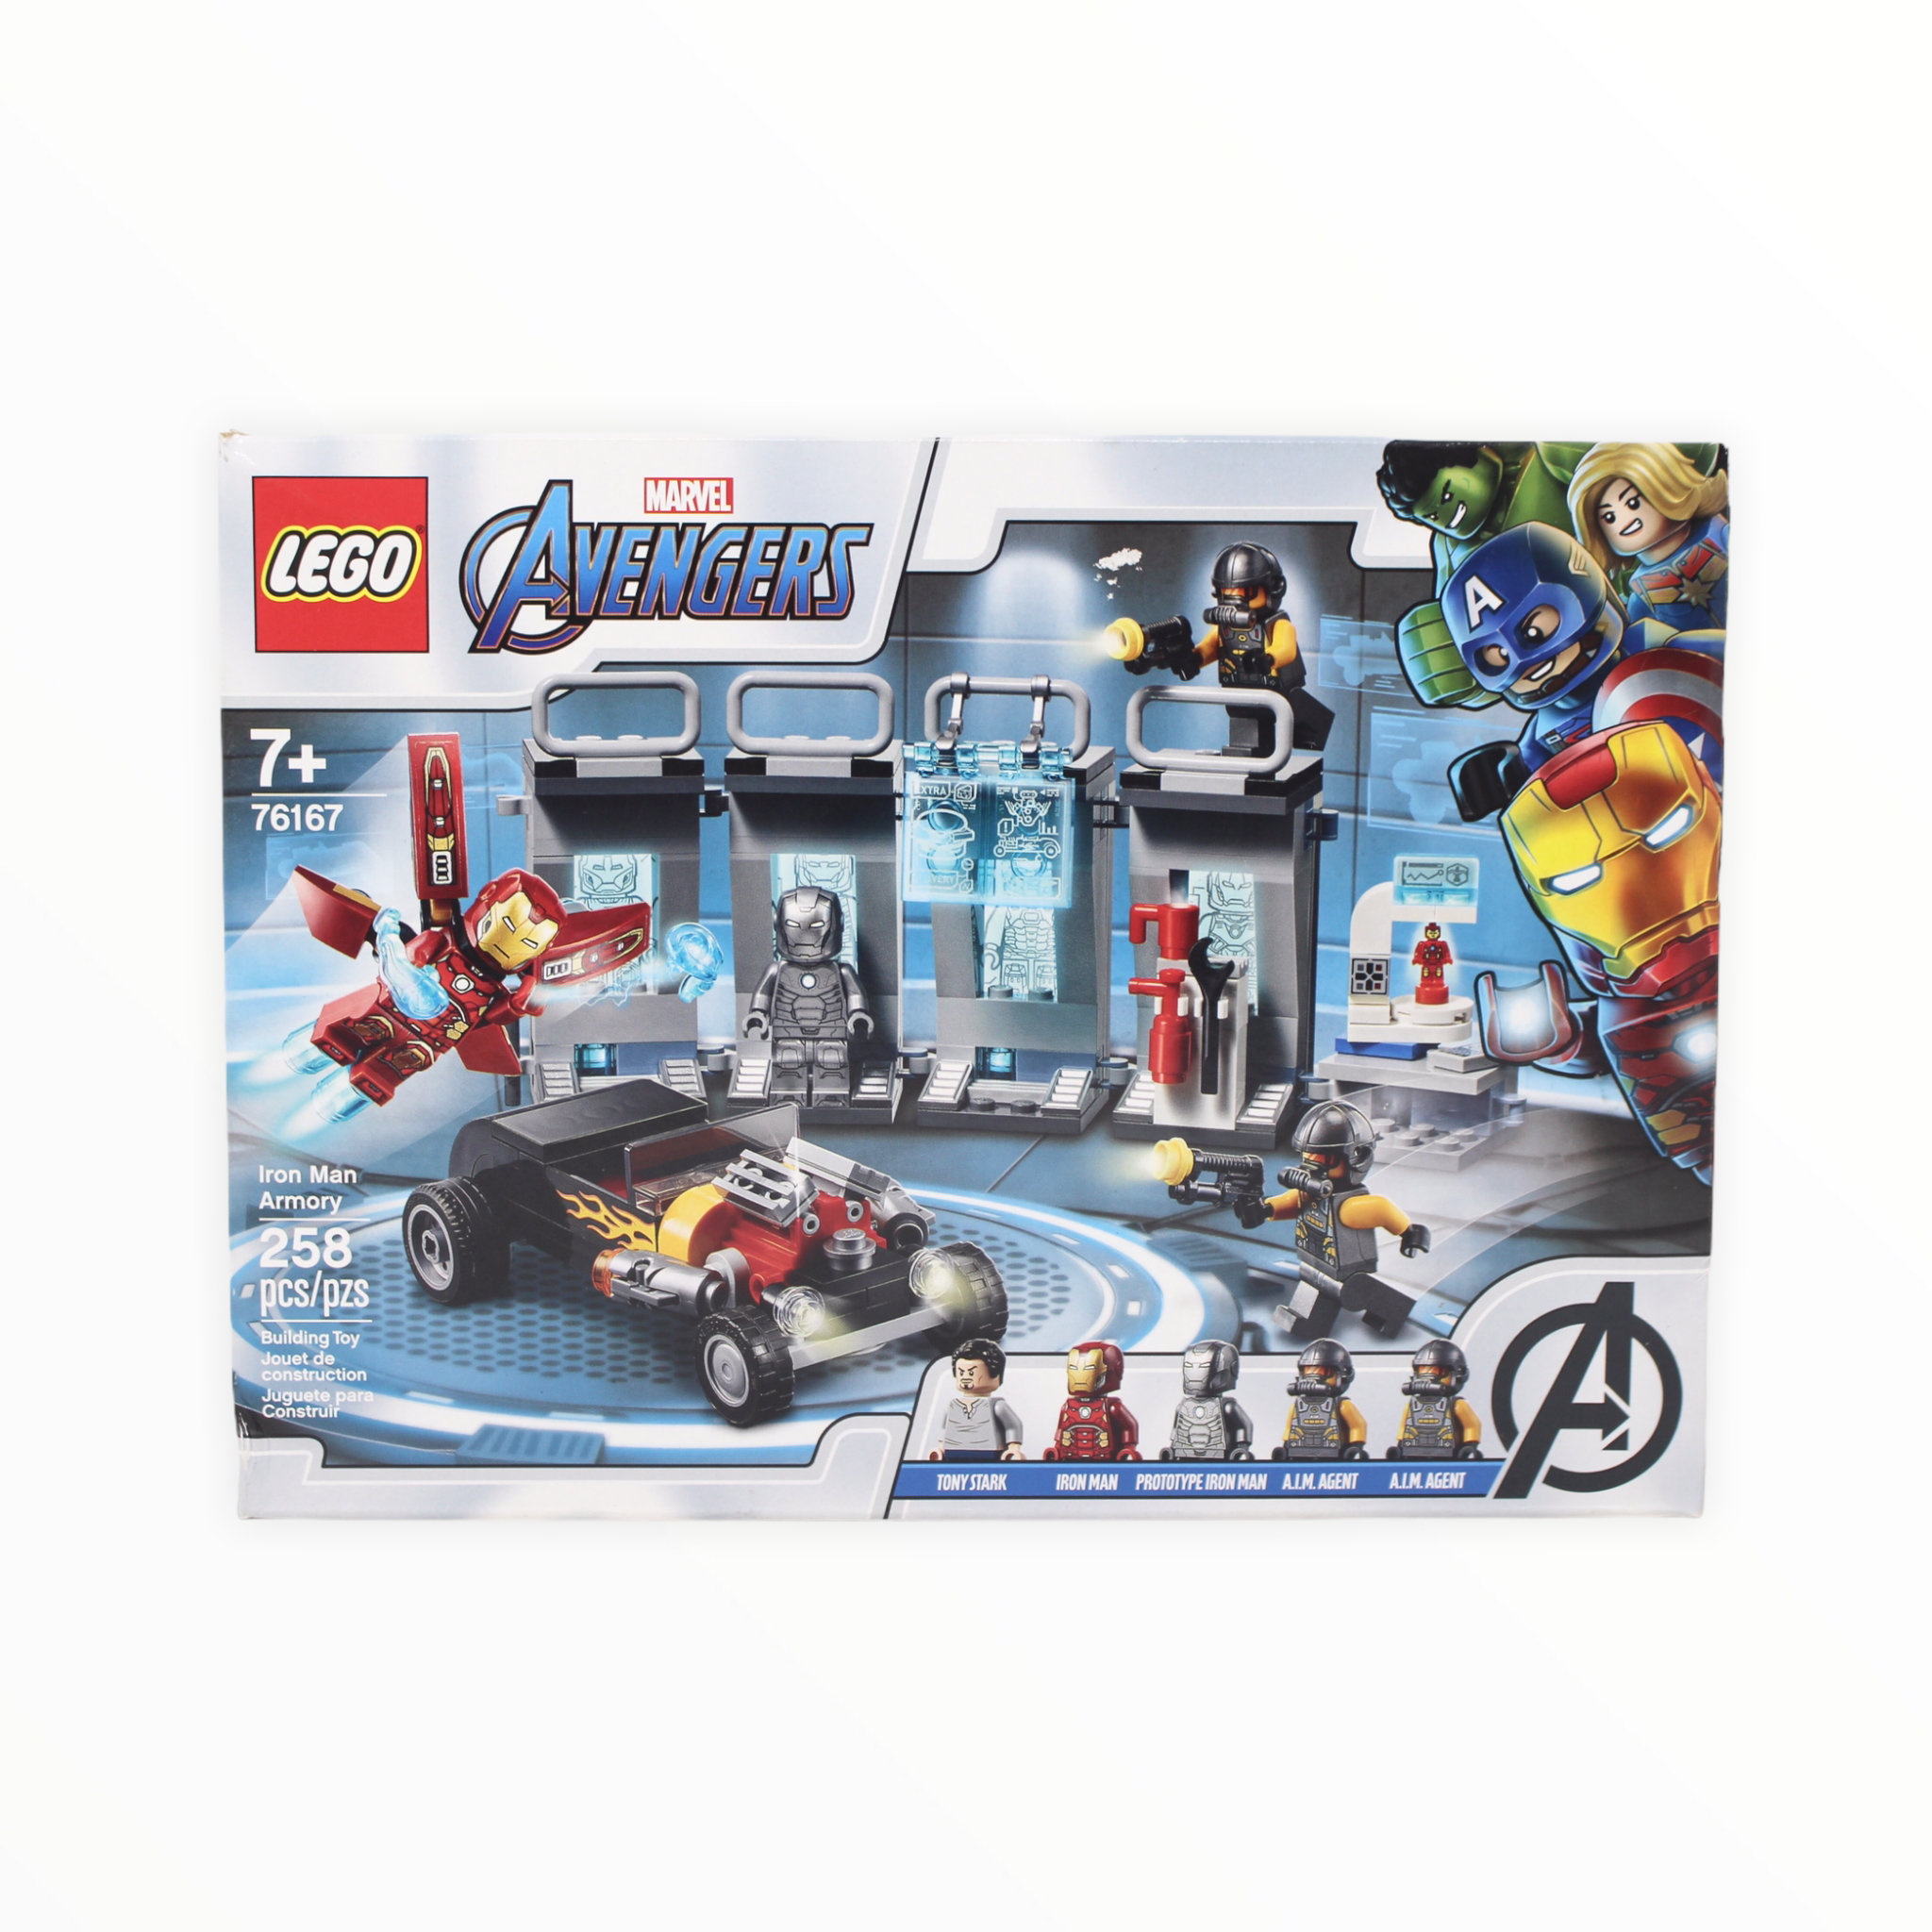 Certified Used Set 76167 Avengers Iron Man Armory